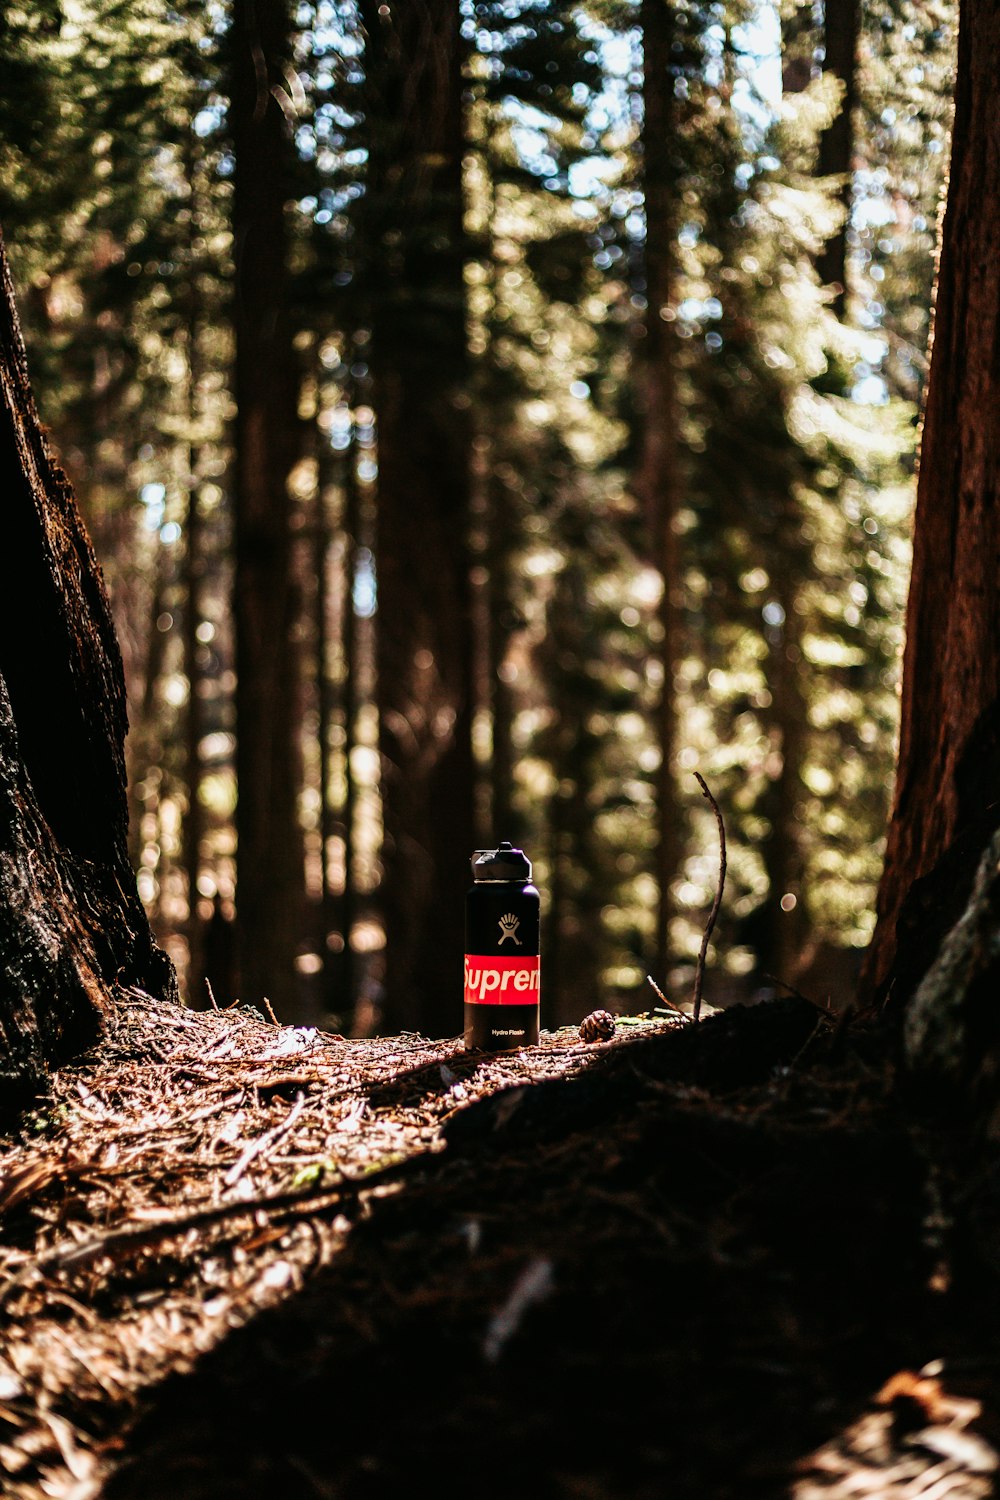 black and red Supreme bottle between two brown tree trunks selective fucos photo